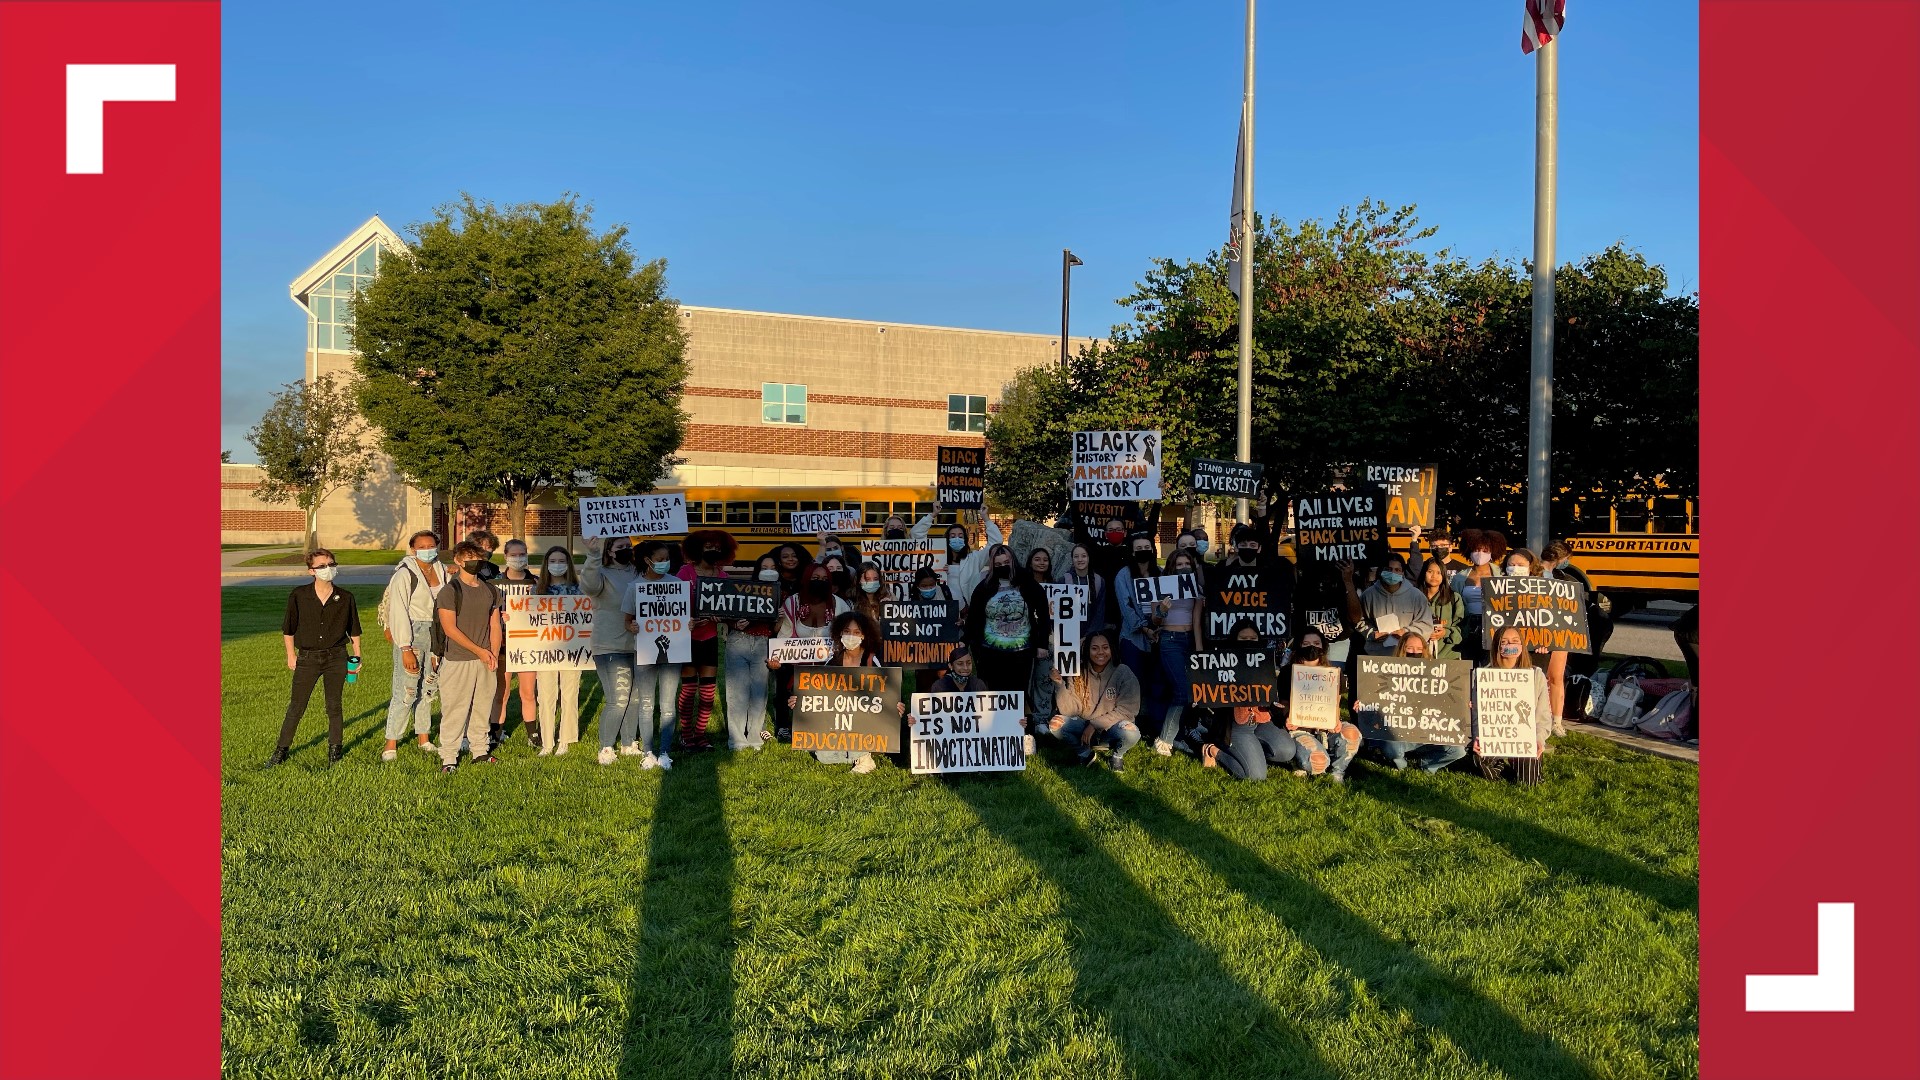 Students at Central York High School hold protest after district bans